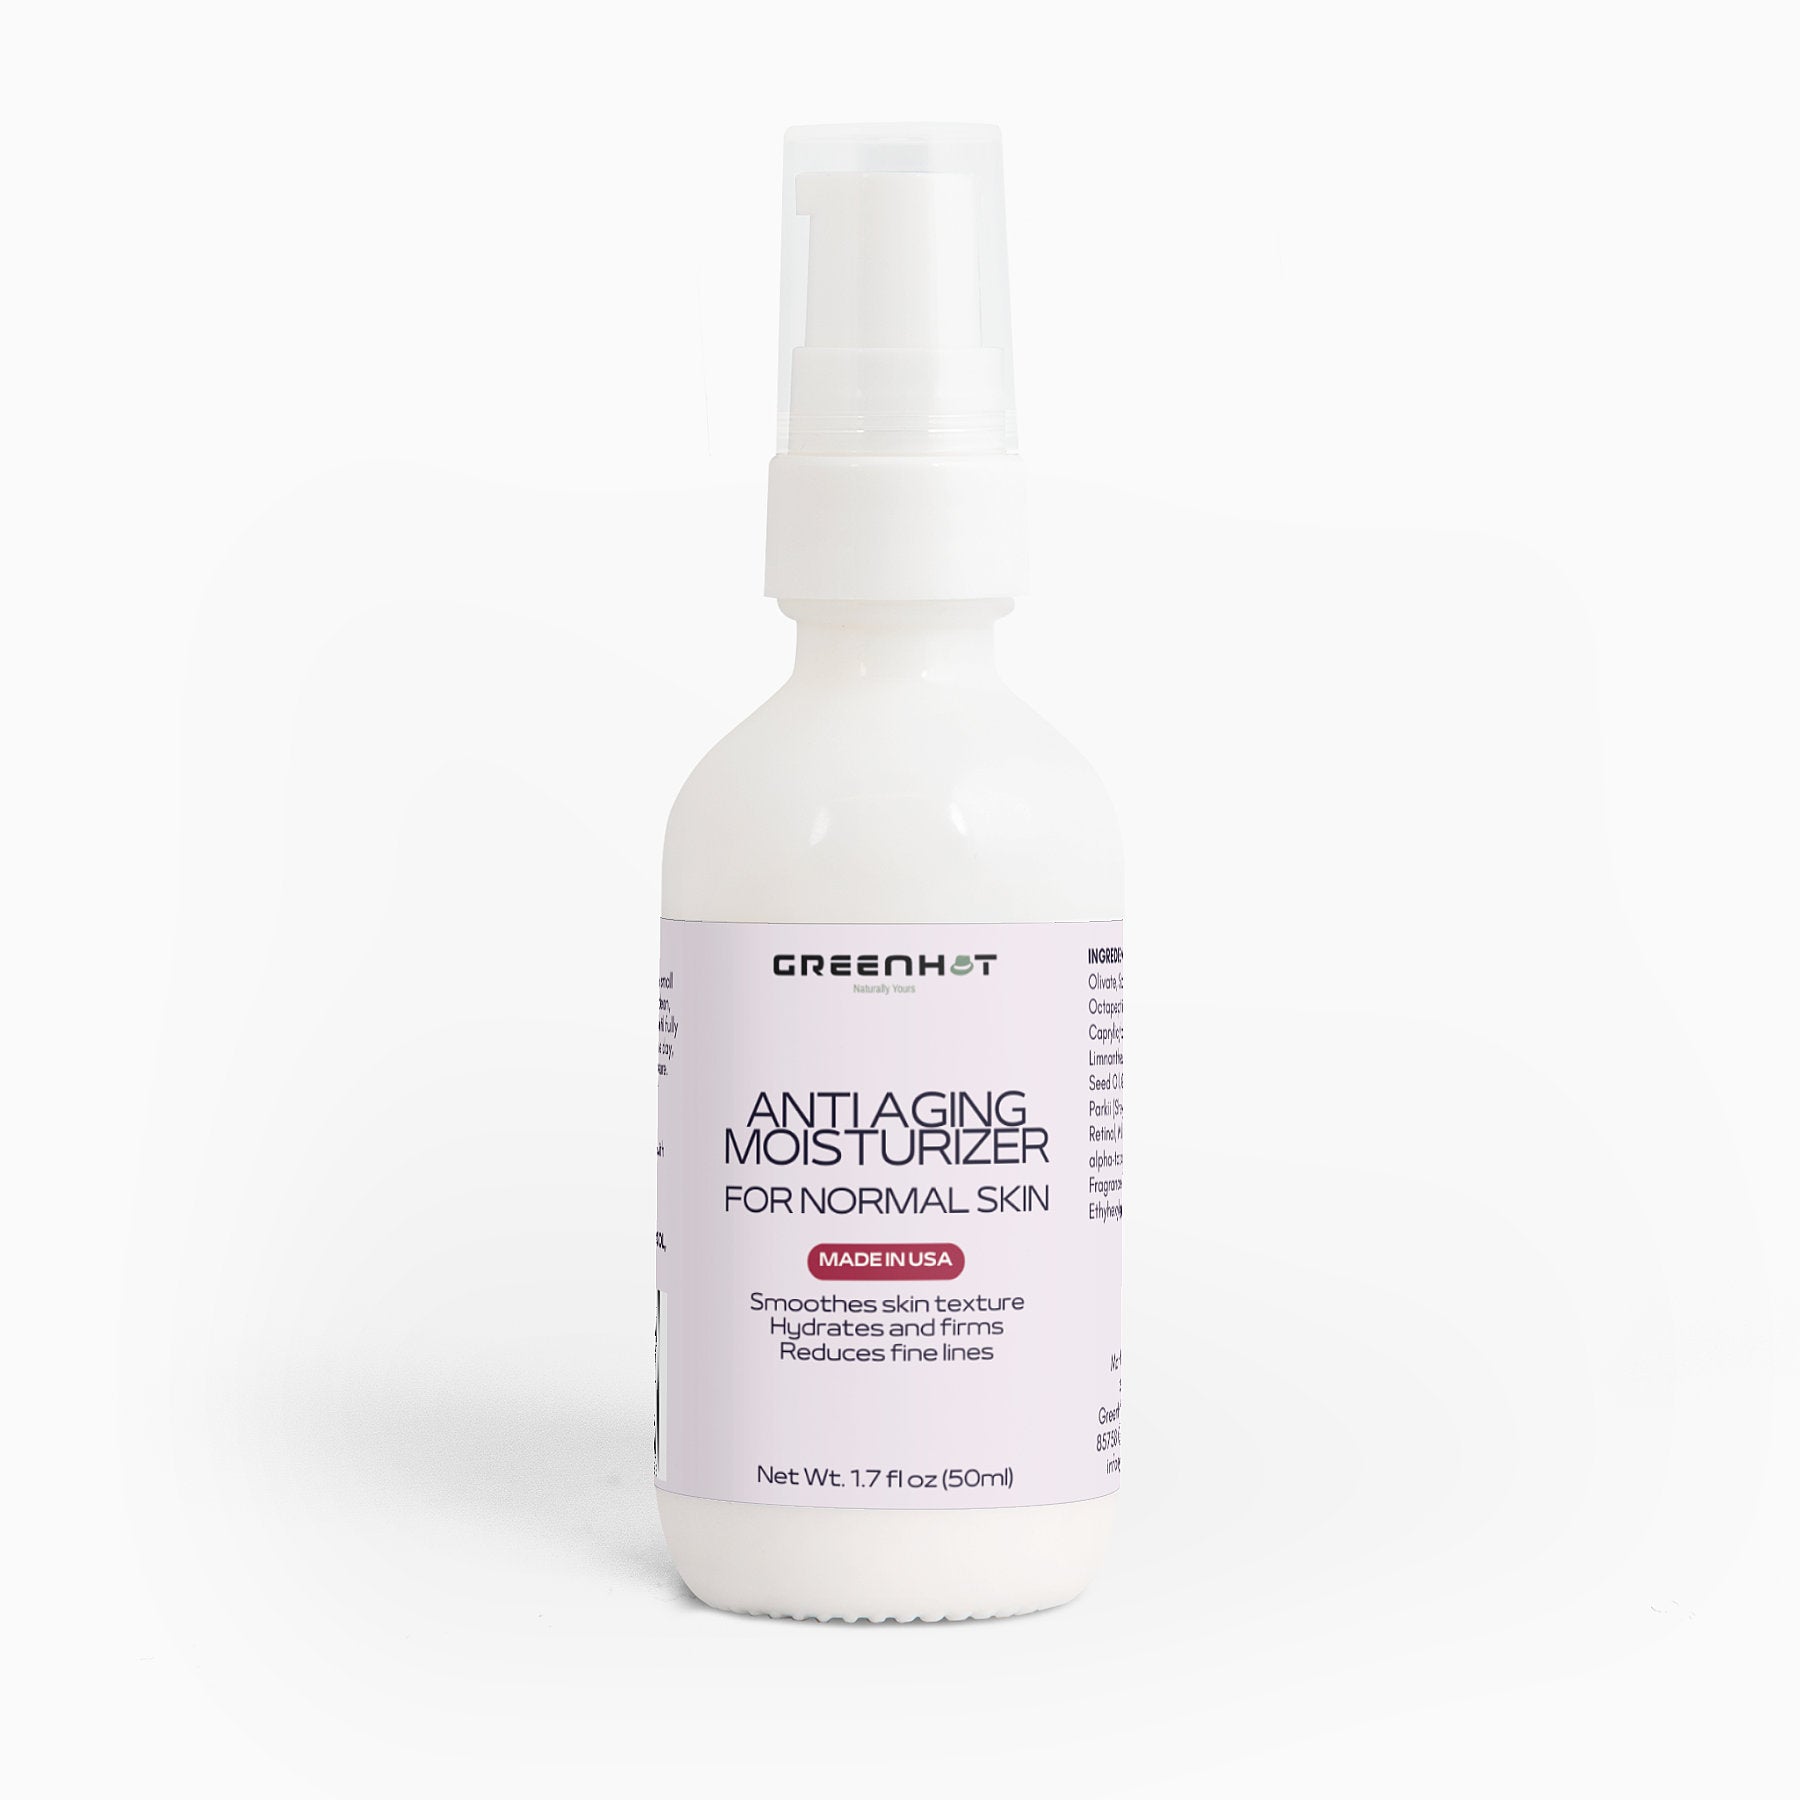 White bottle of GreenHat collagen-boosting anti-aging moisturizer for normal skin on a plain background.